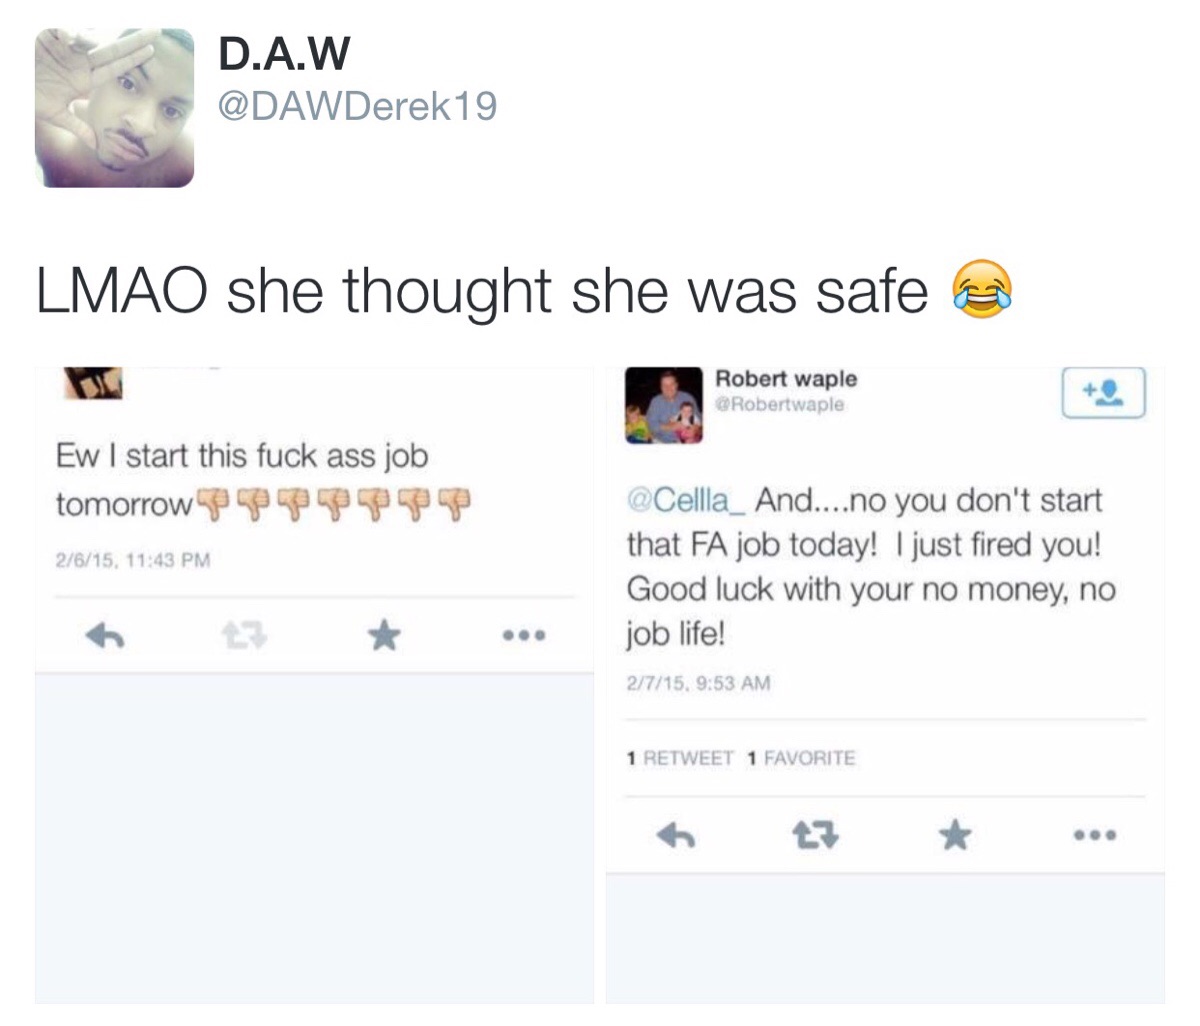 21 Hilarious Pictures From "Black Twitter"